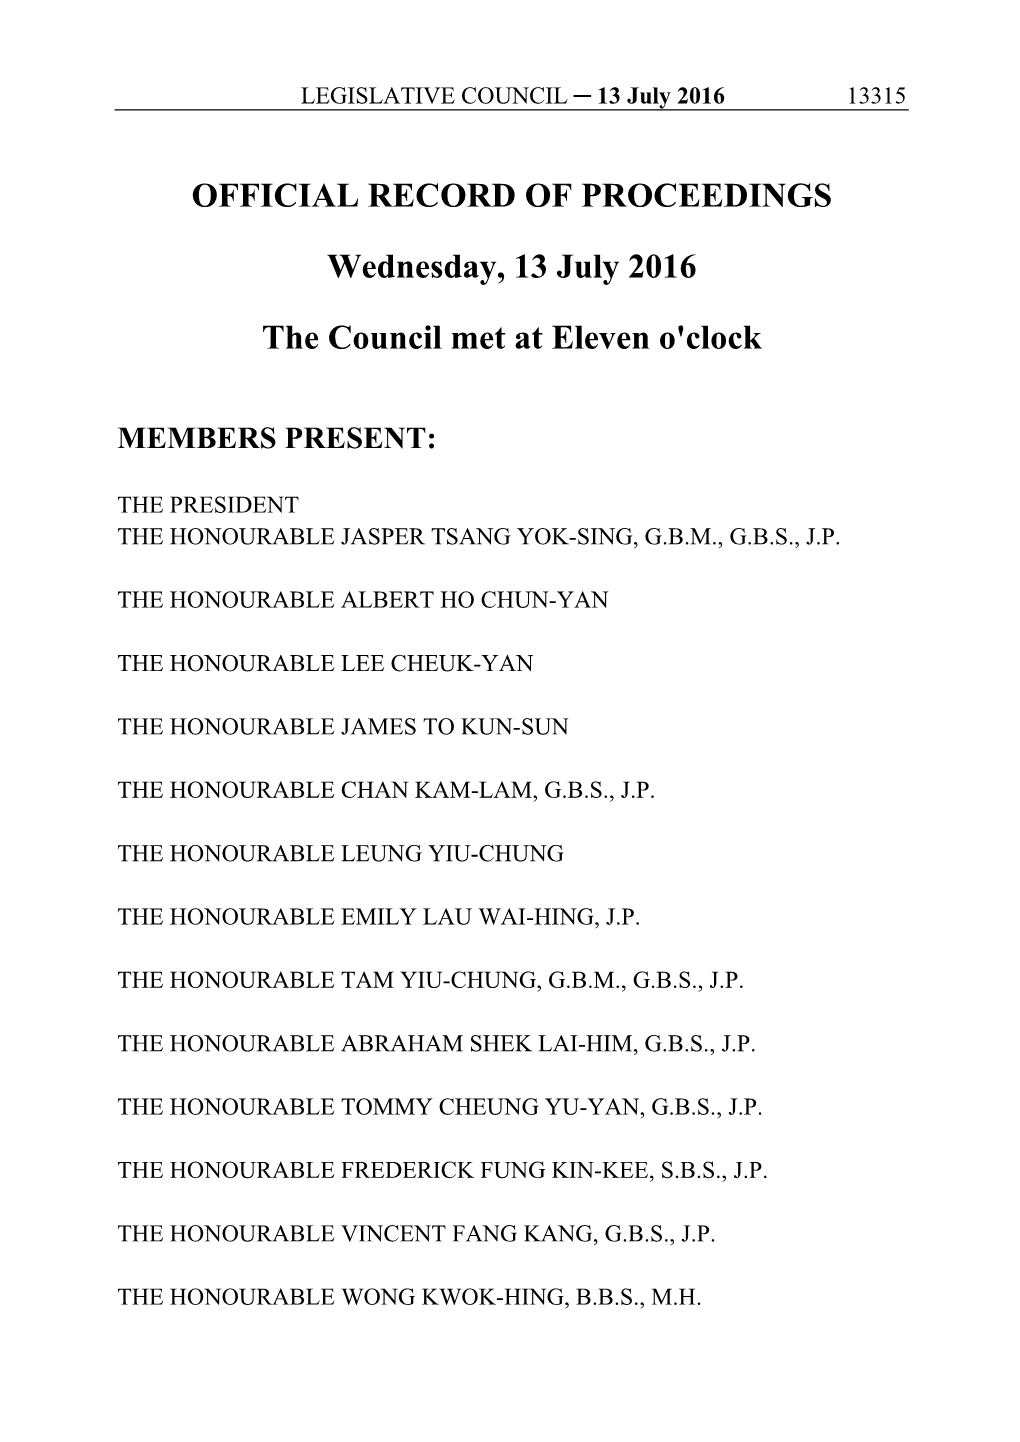 OFFICIAL RECORD of PROCEEDINGS Wednesday, 13